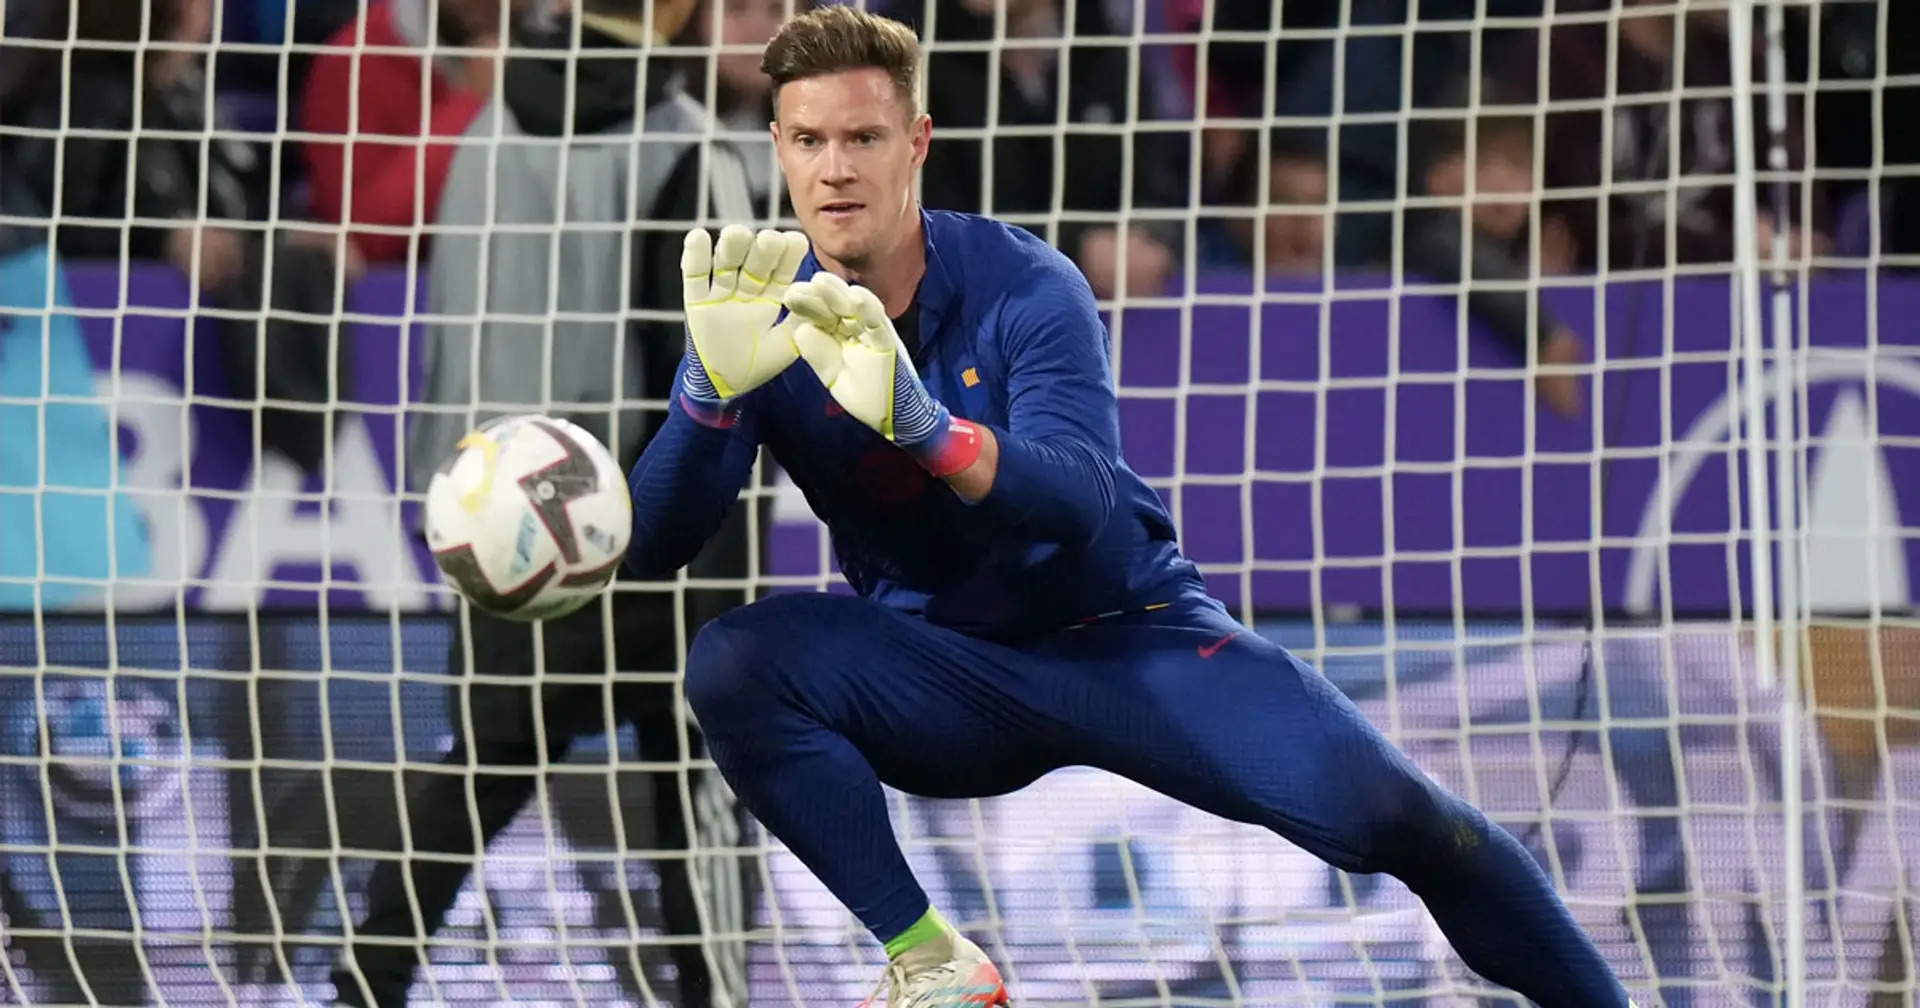 'Since then he became amazing!': Fan names turning point in Ter Stegen's career - not his contract renewal